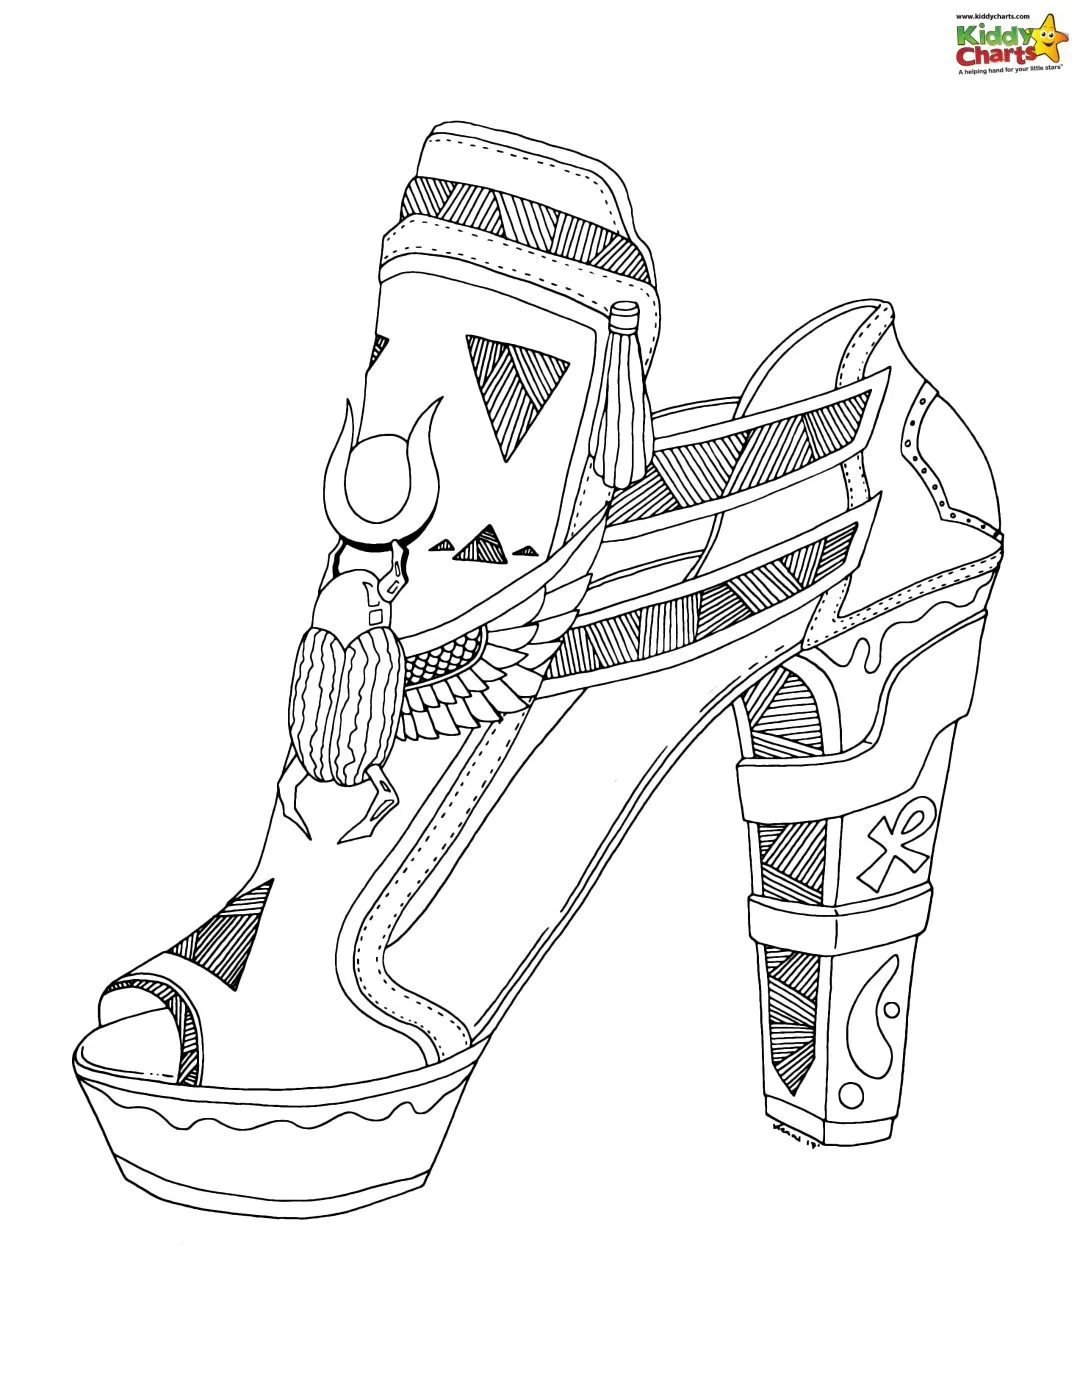 Another high heel shoe to color in; this time for the kids!